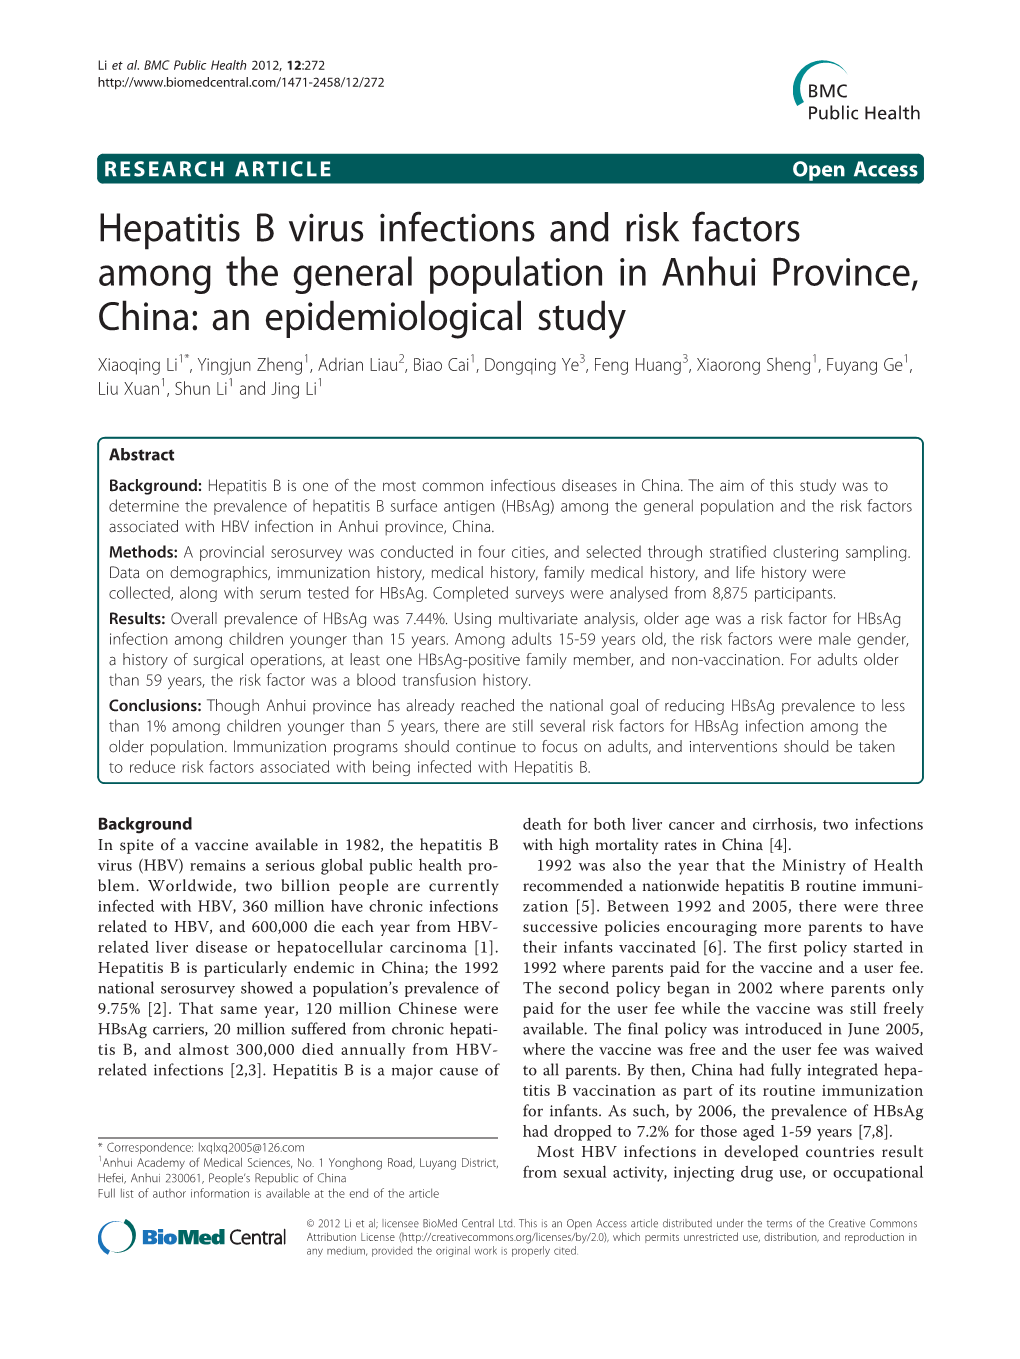 Hepatitis B Virus Infections and Risk Factors Among the General Population in Anhui Province, China: an Epidemiological Study